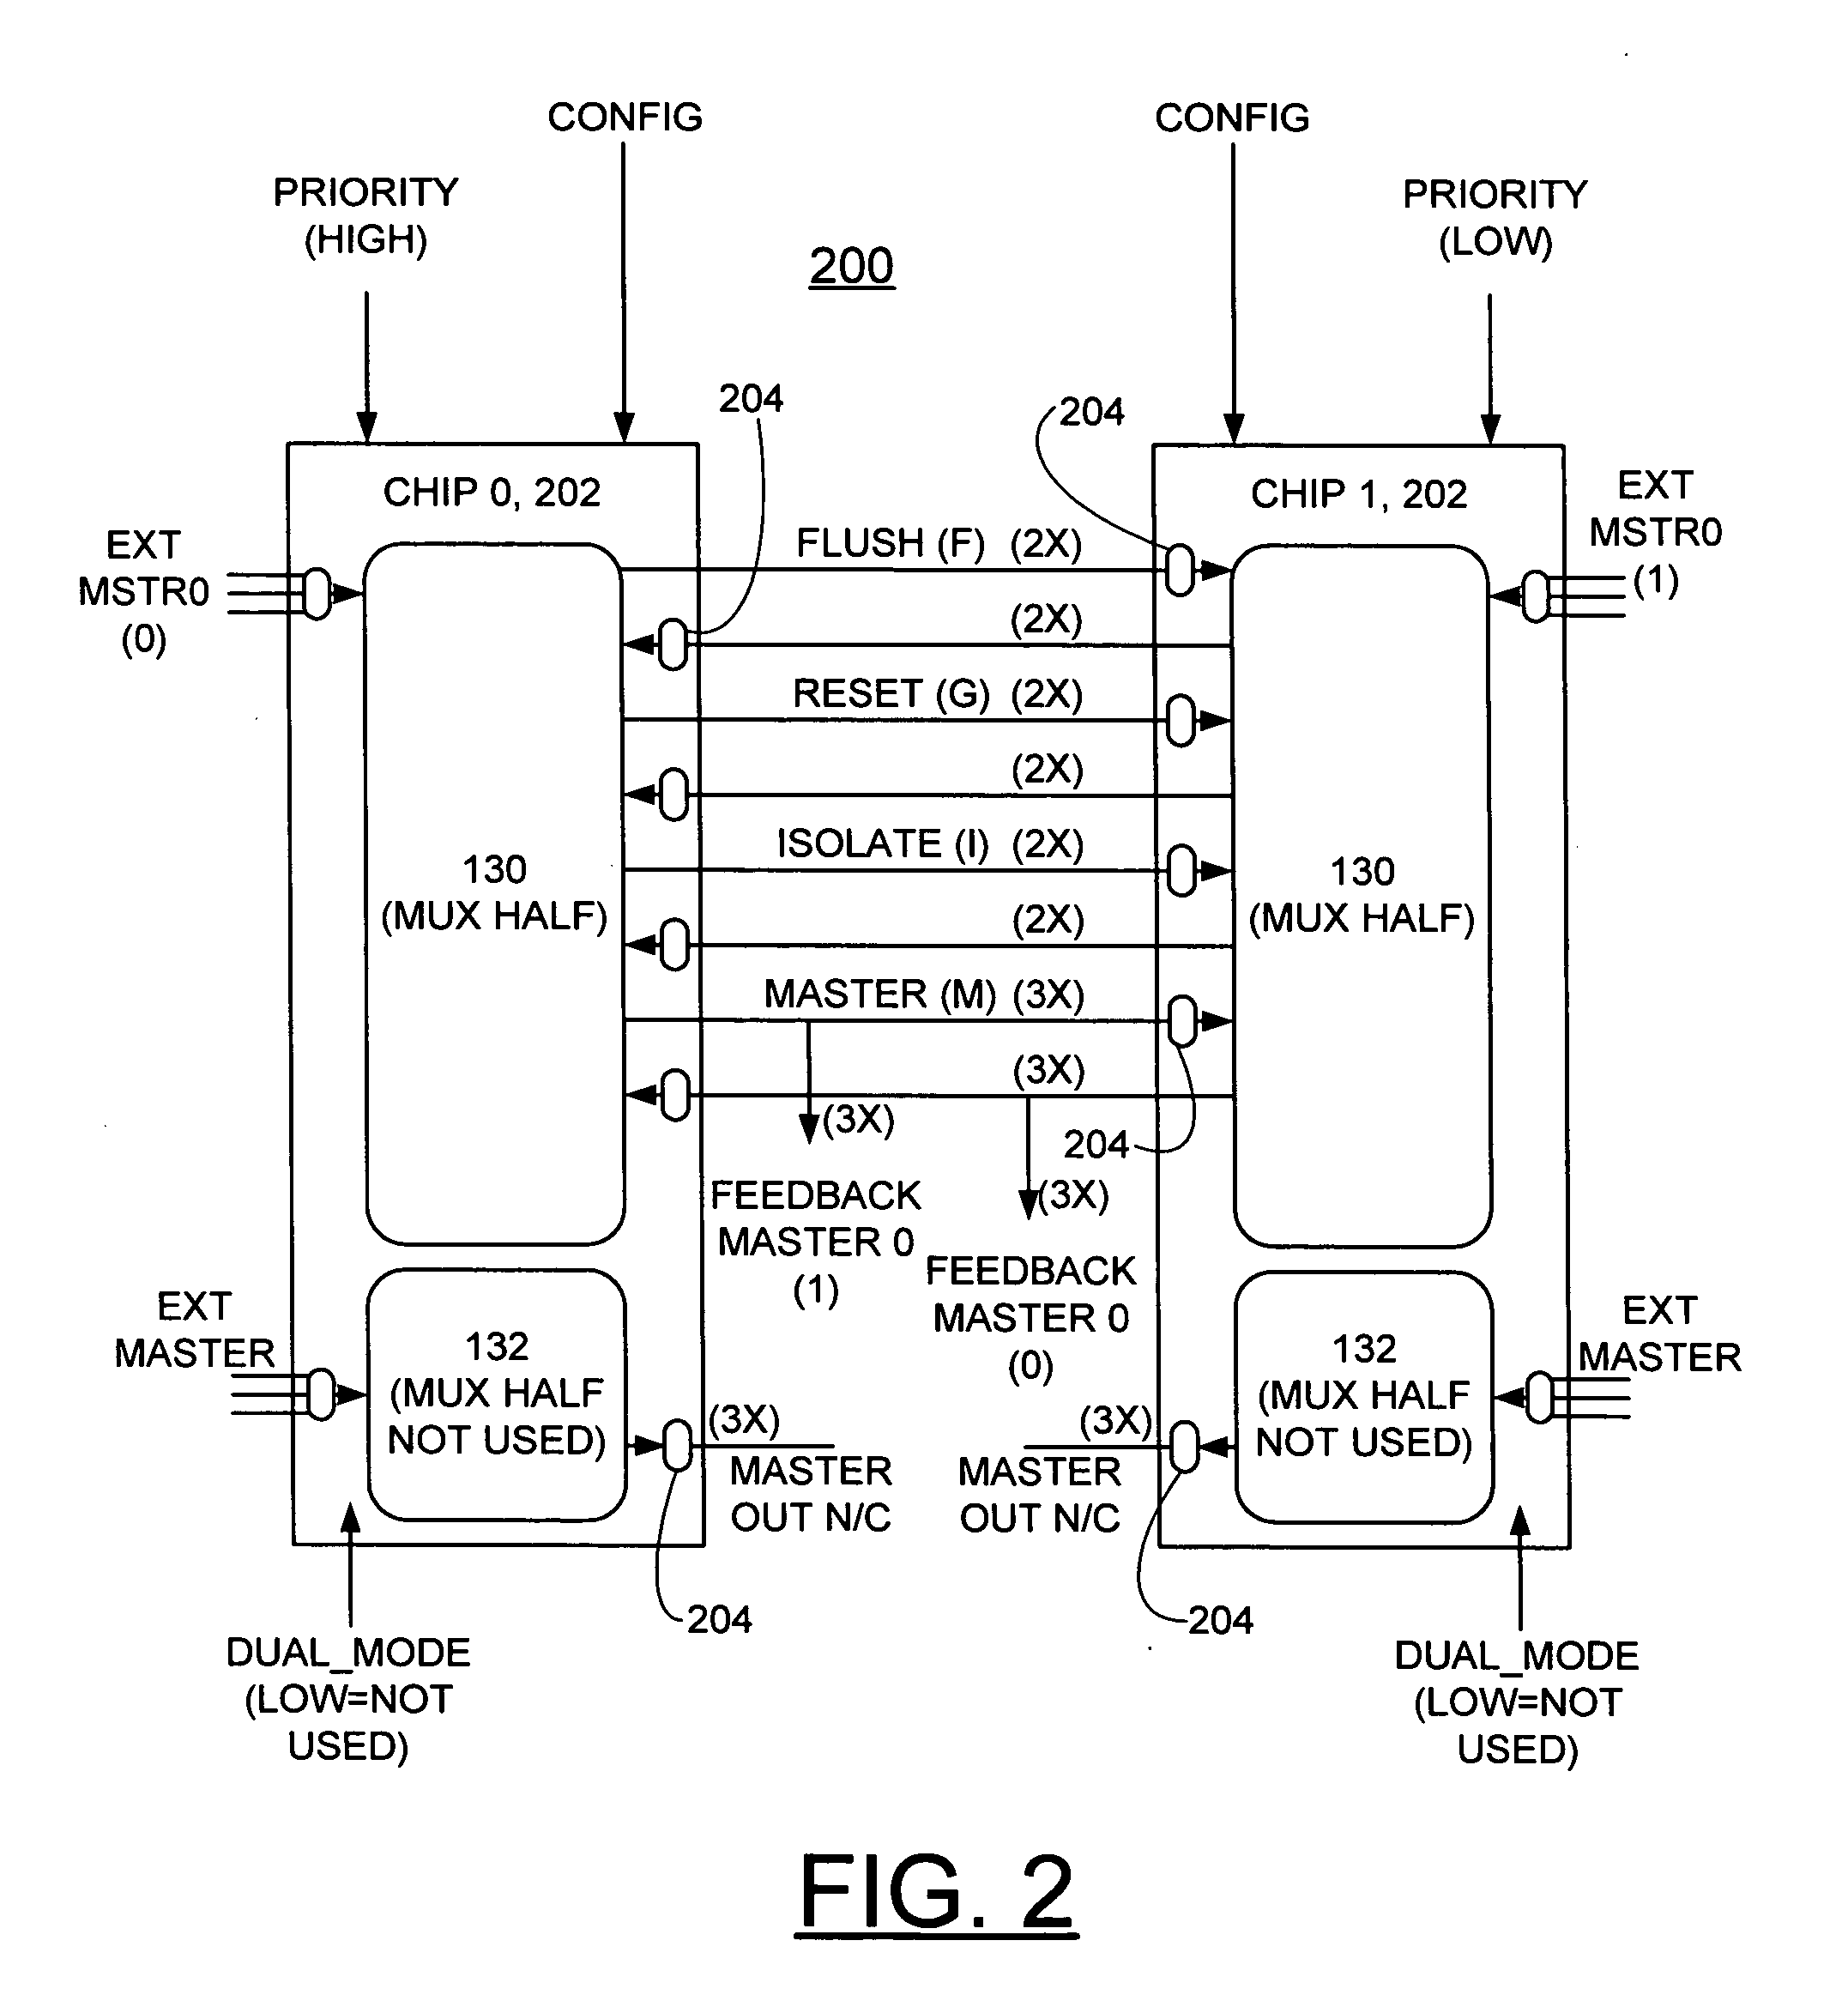 Method and apparatus for customizing and monitoring multiple interfaces and implementing enhanced fault tolerance and isolation features